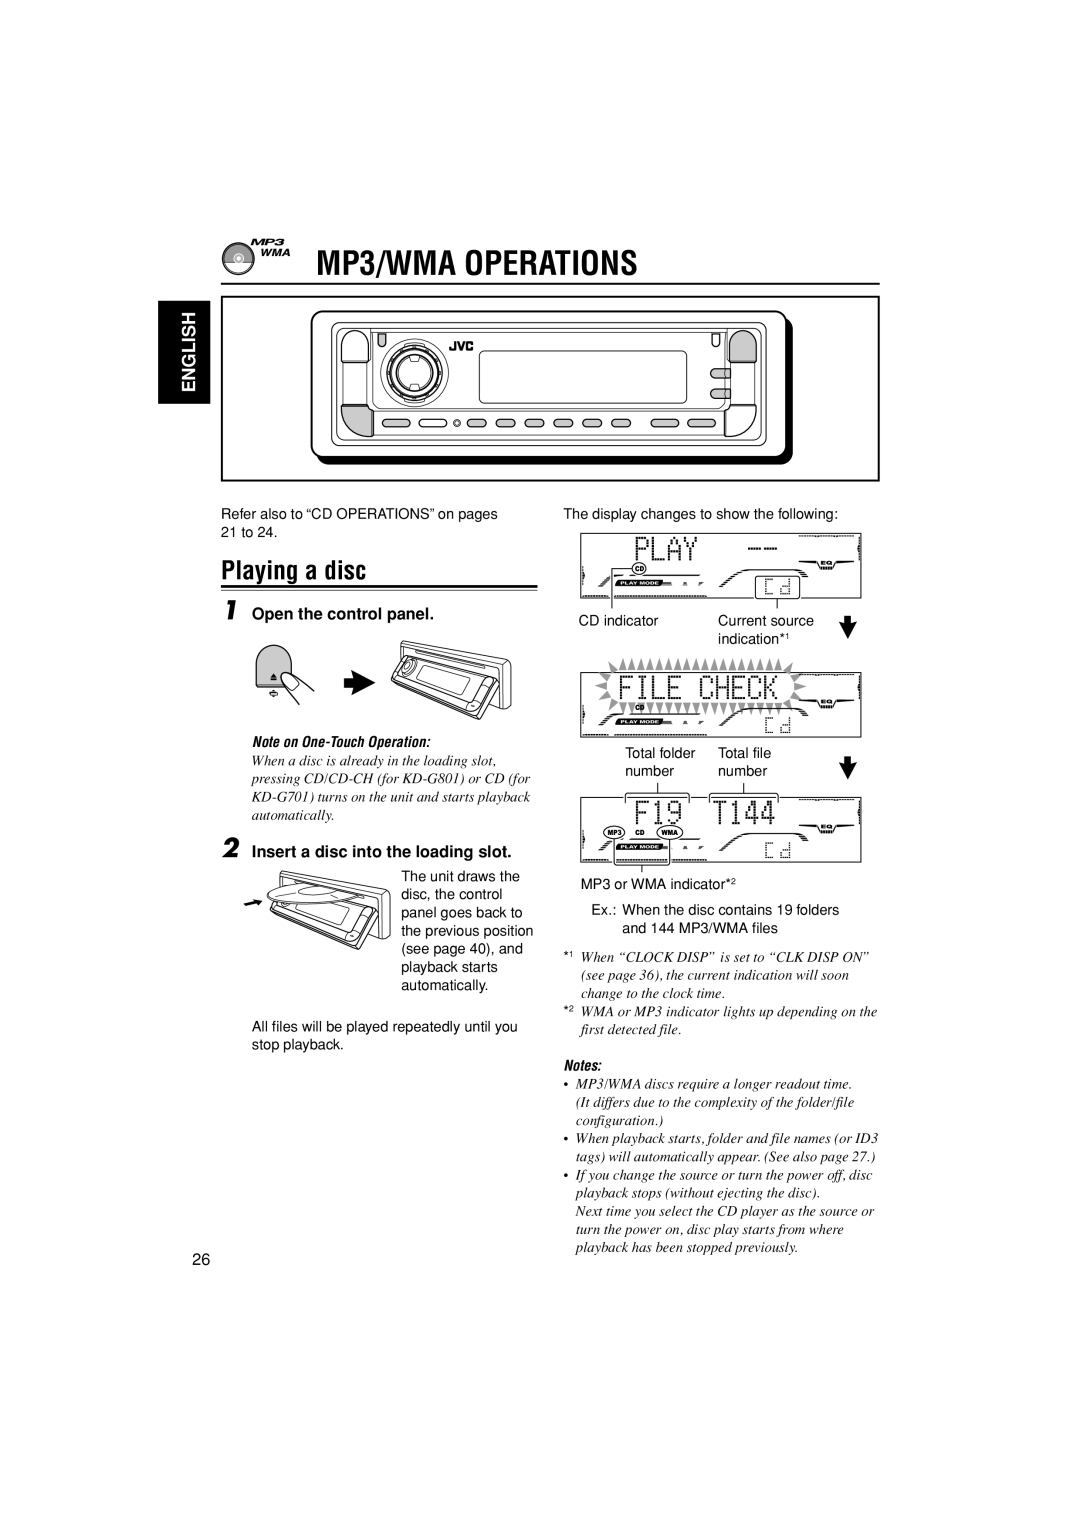 JVC GET0199-001A, GET0200-002A, GET0199-005A manual MP3/WMA Operations, Playing a disc, Insert a disc into the loading slot 